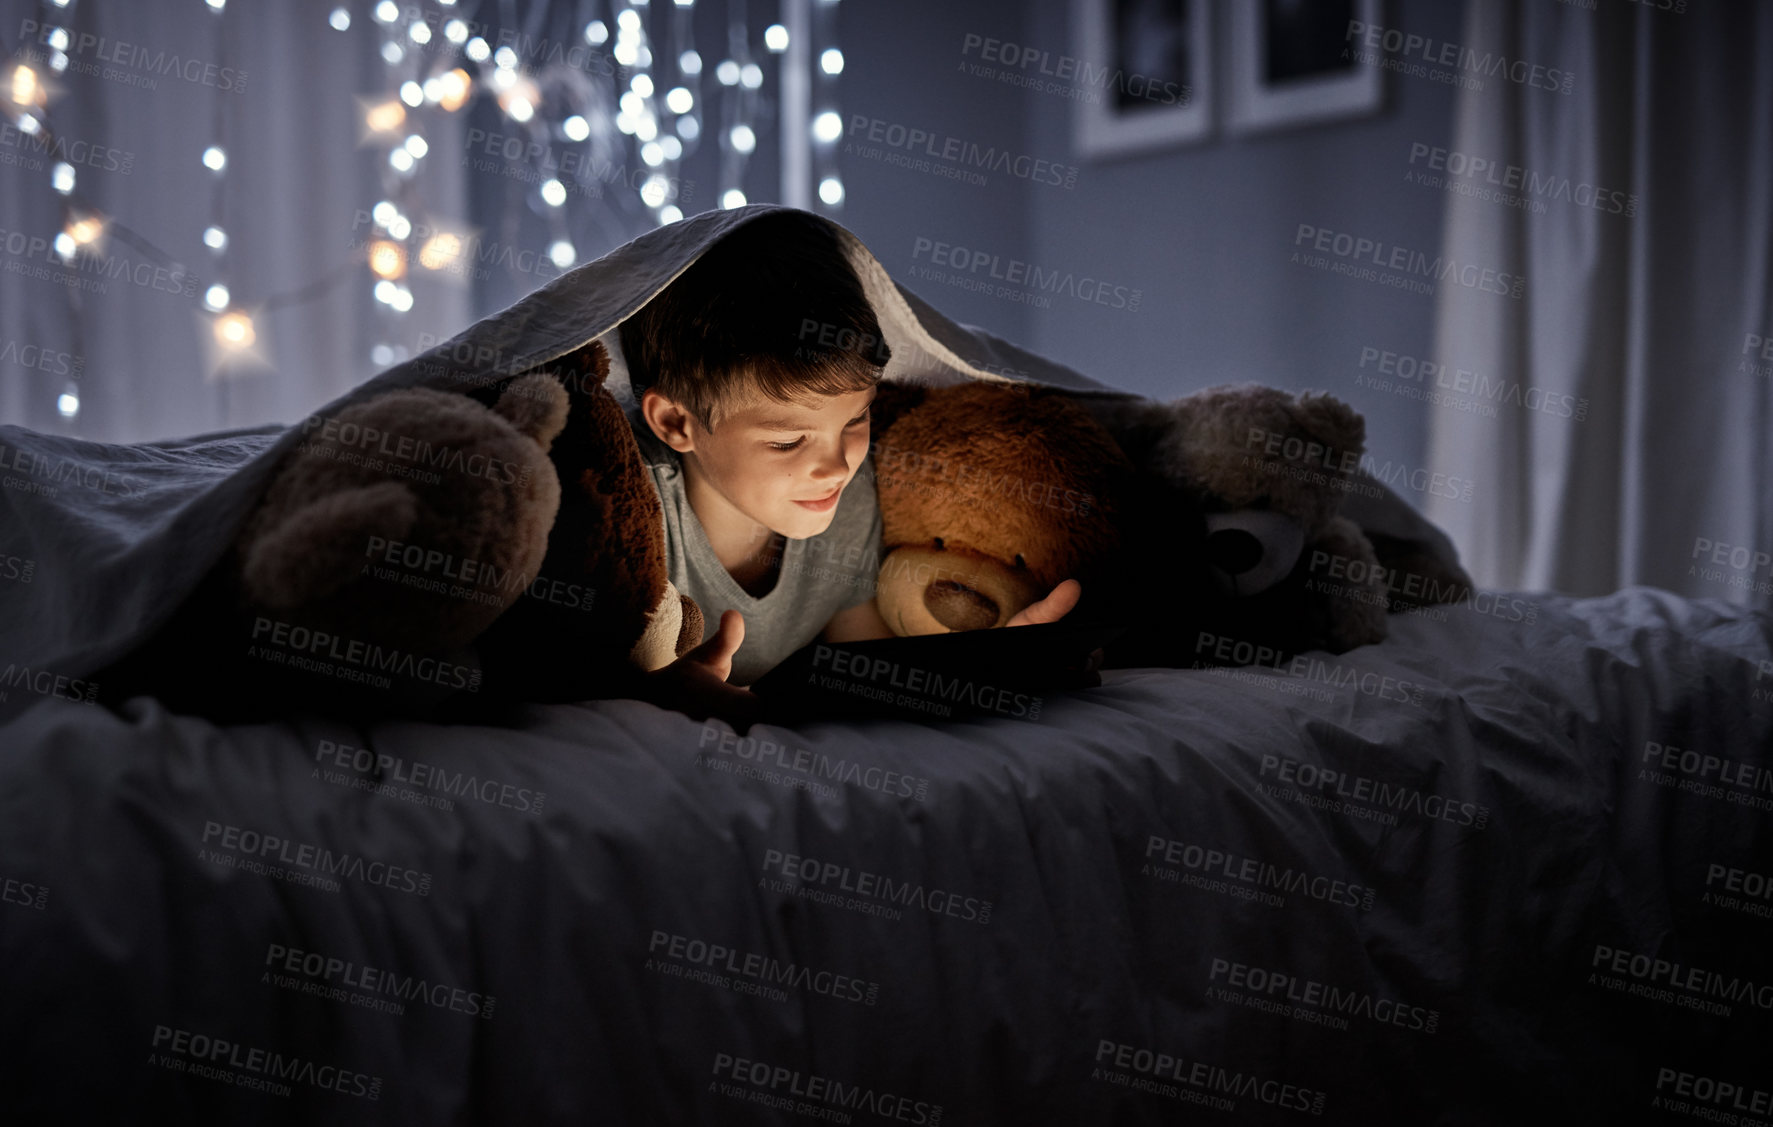 Buy stock photo Shot of an adorable little boy using a digital tablet in bed at night